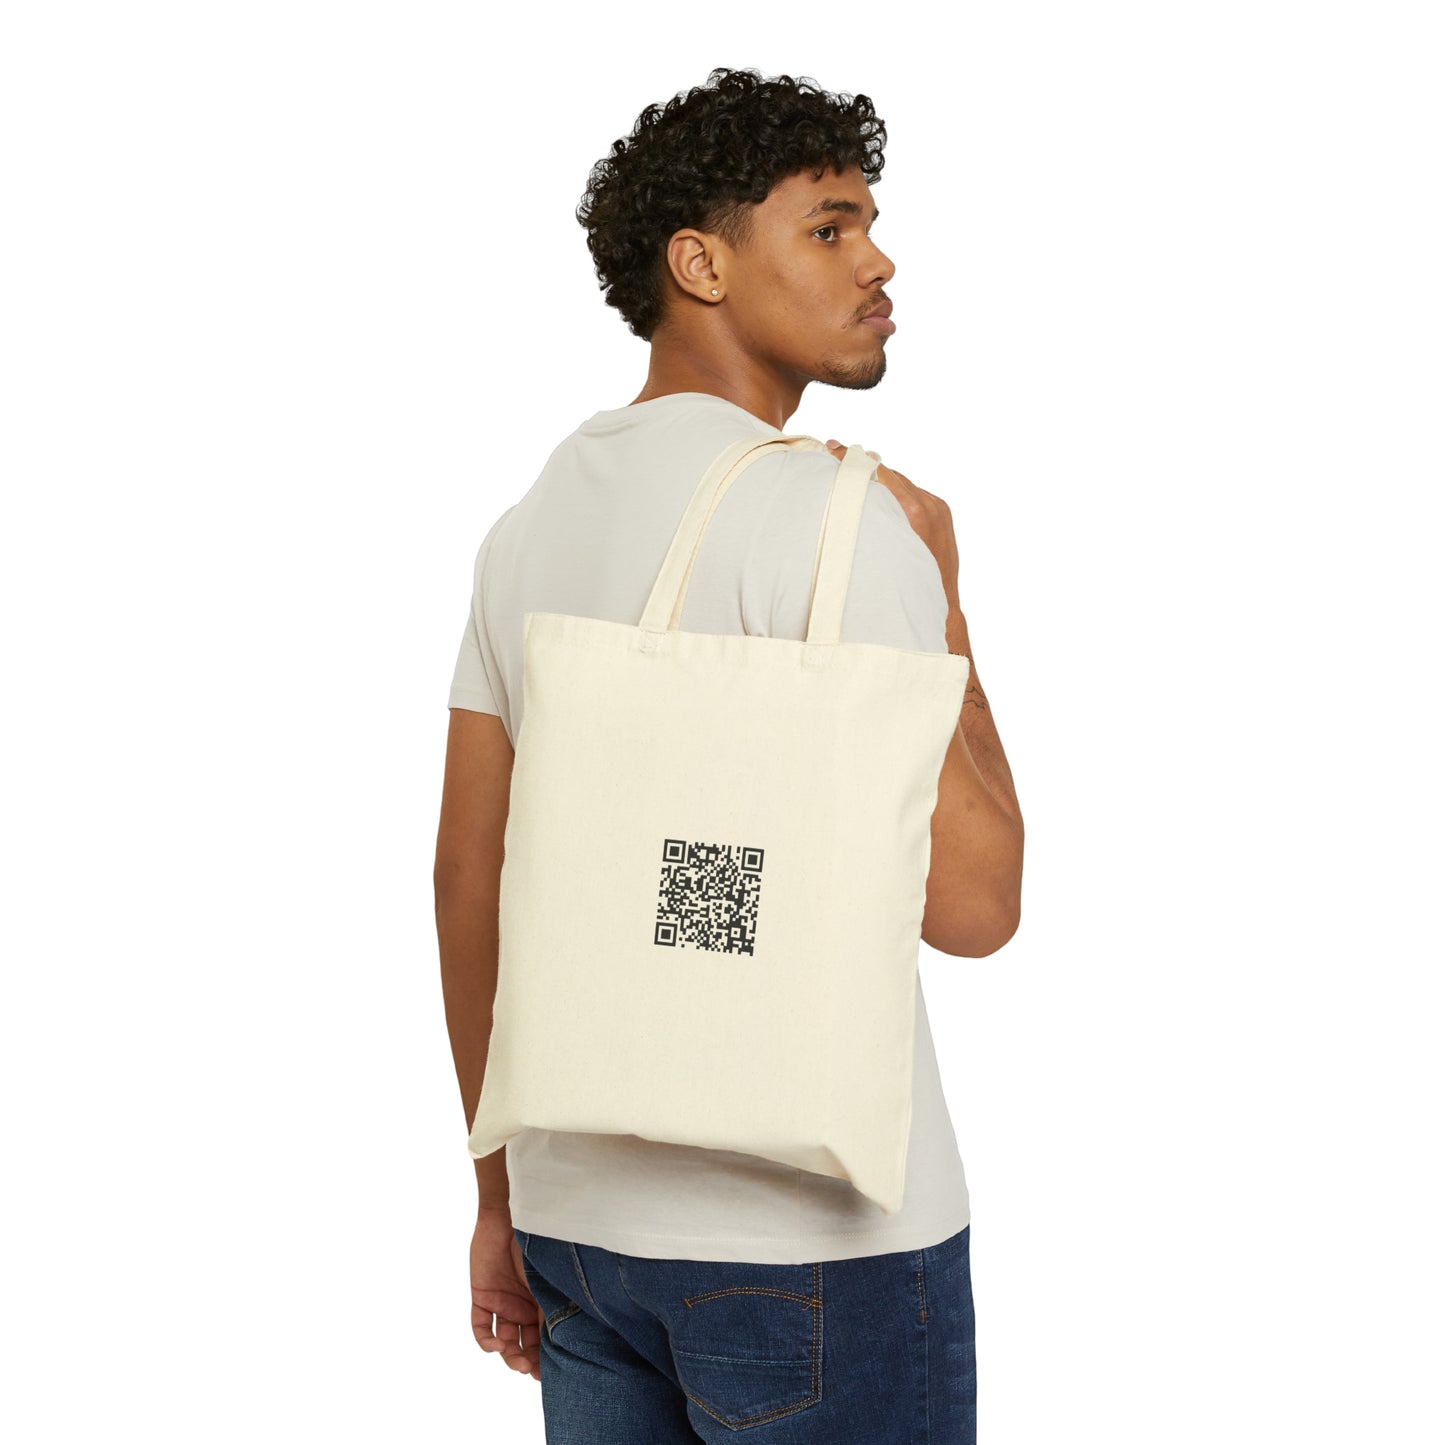 In Absence - Cotton Canvas Tote Bag